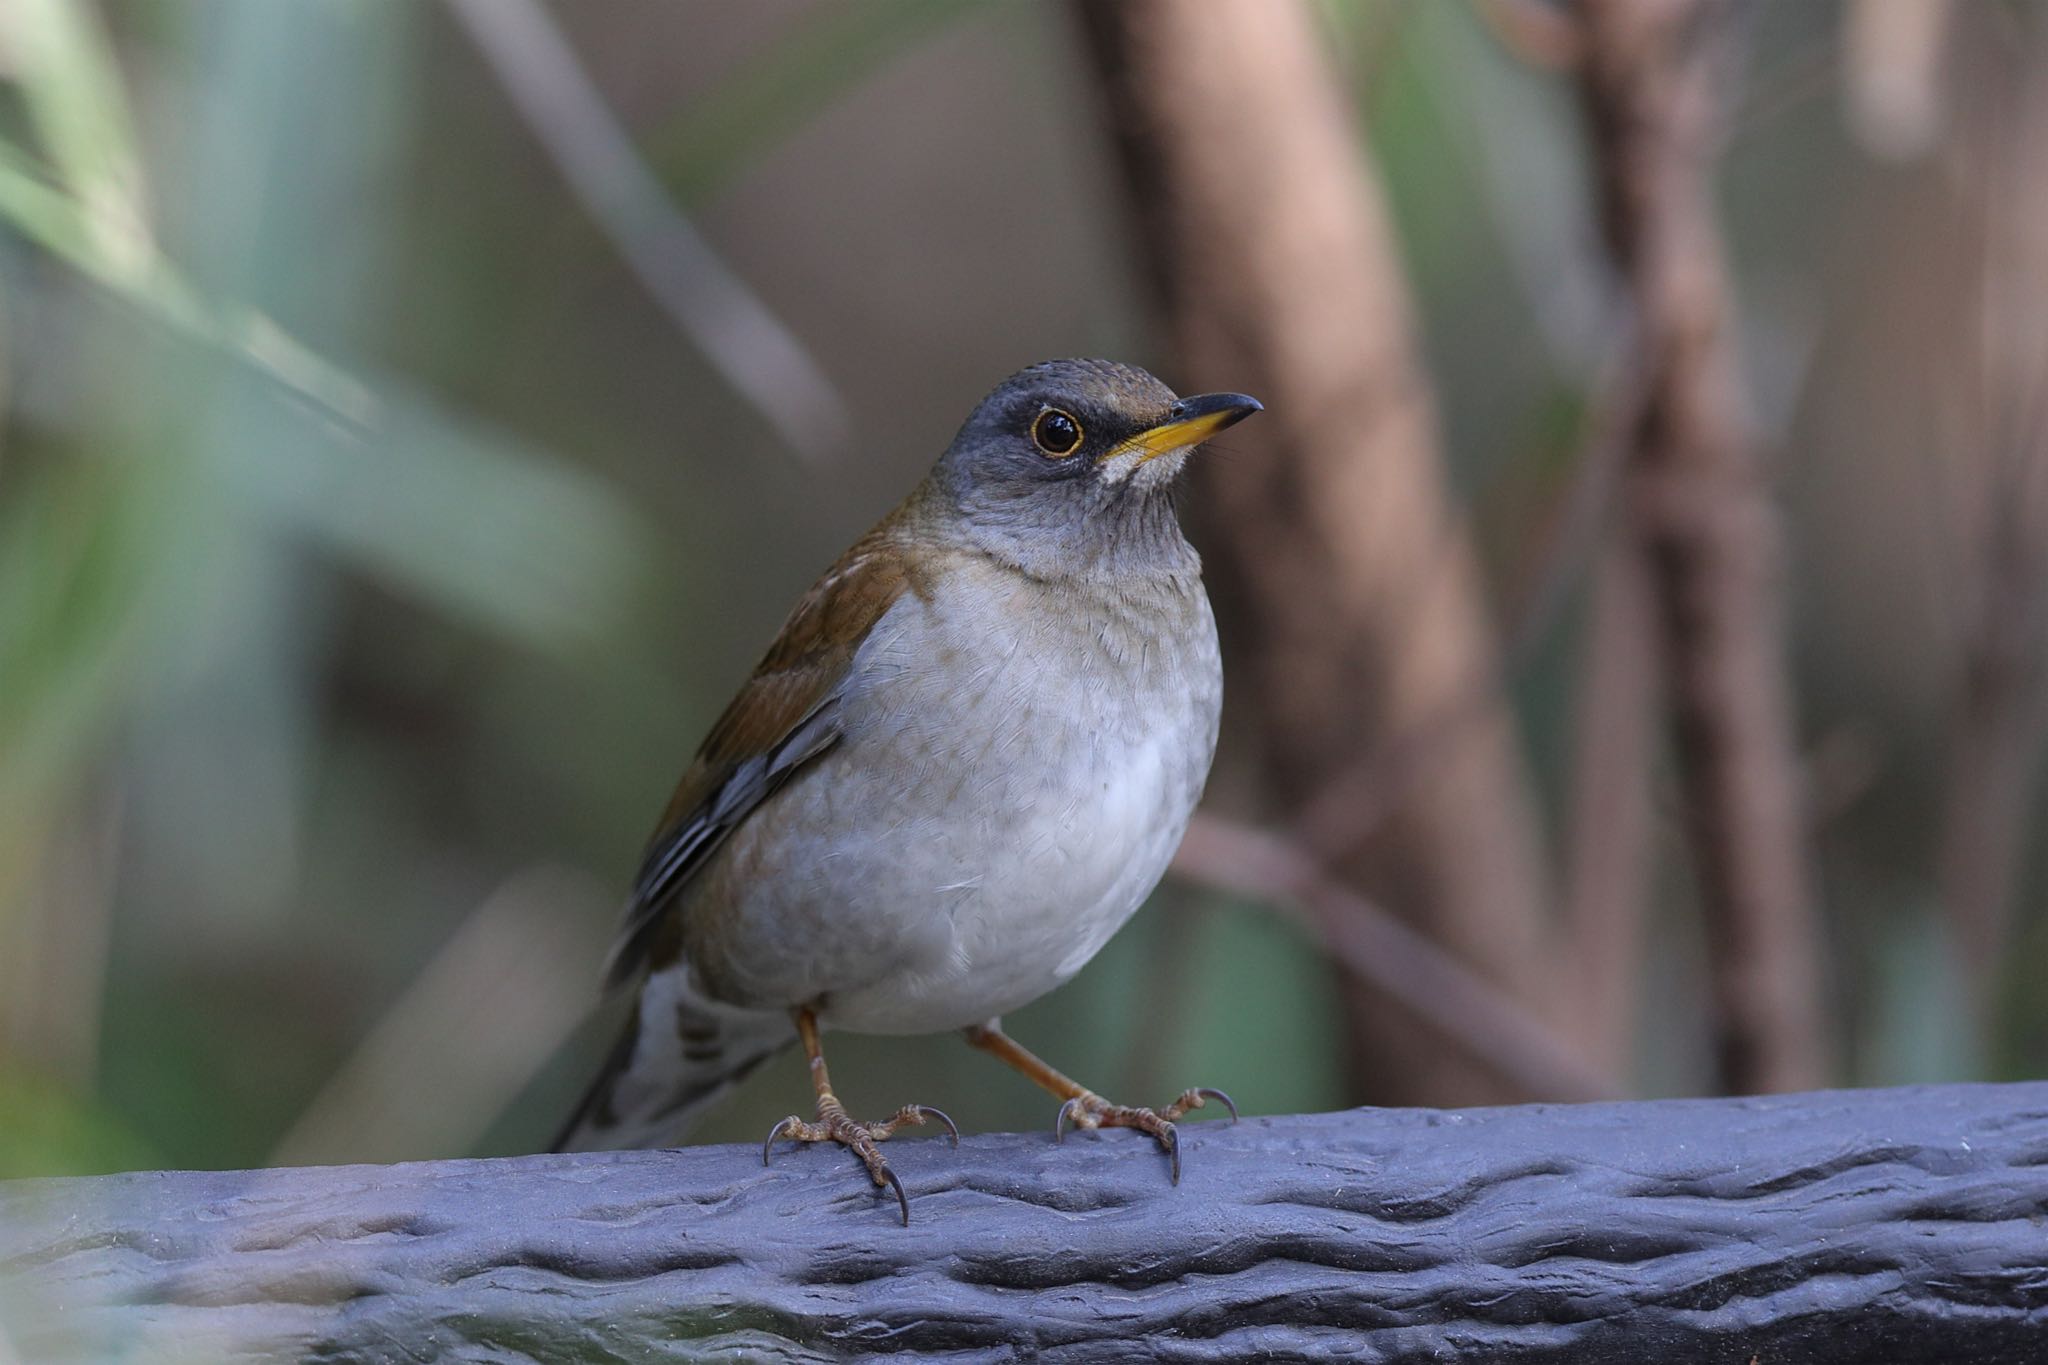 Photo of Pale Thrush at Kodomo Shizen Park by こぐまごろう